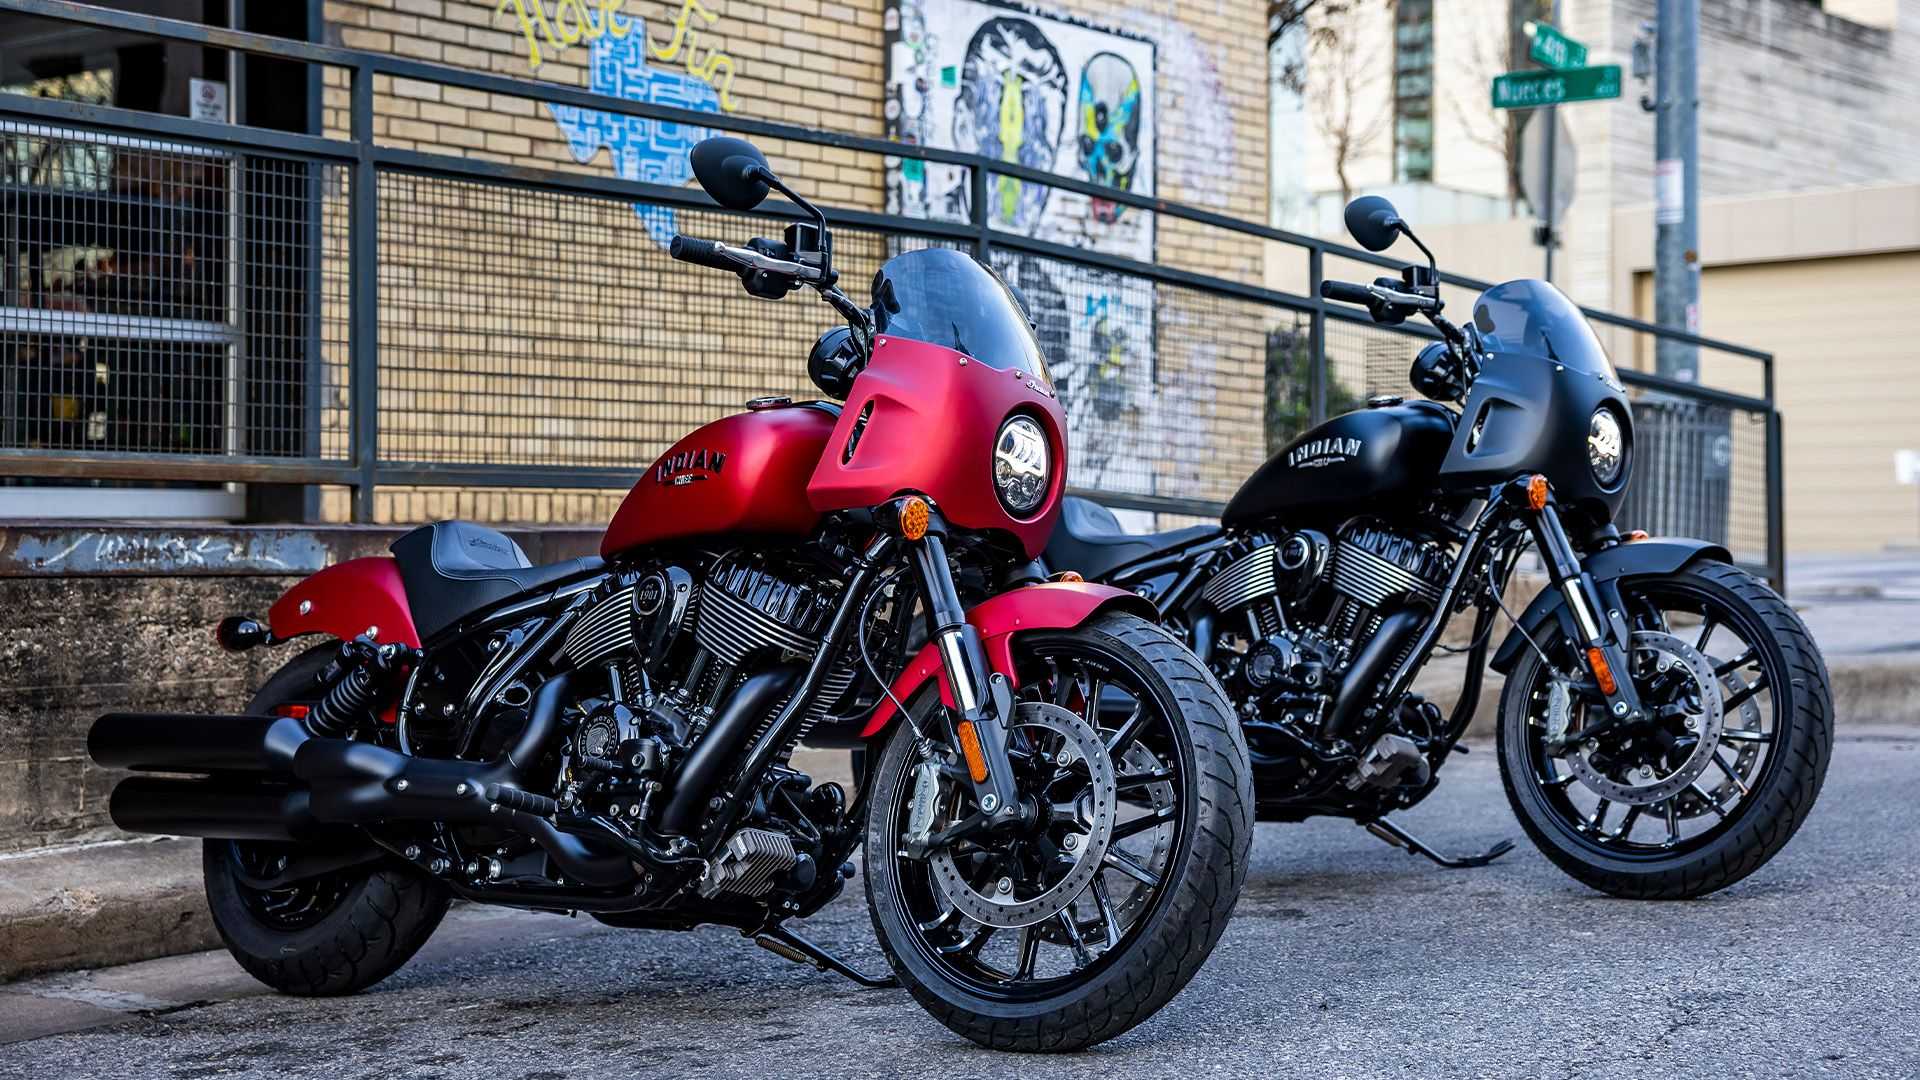 2023 Indian Sport Chief Motorcycles in Red and Black